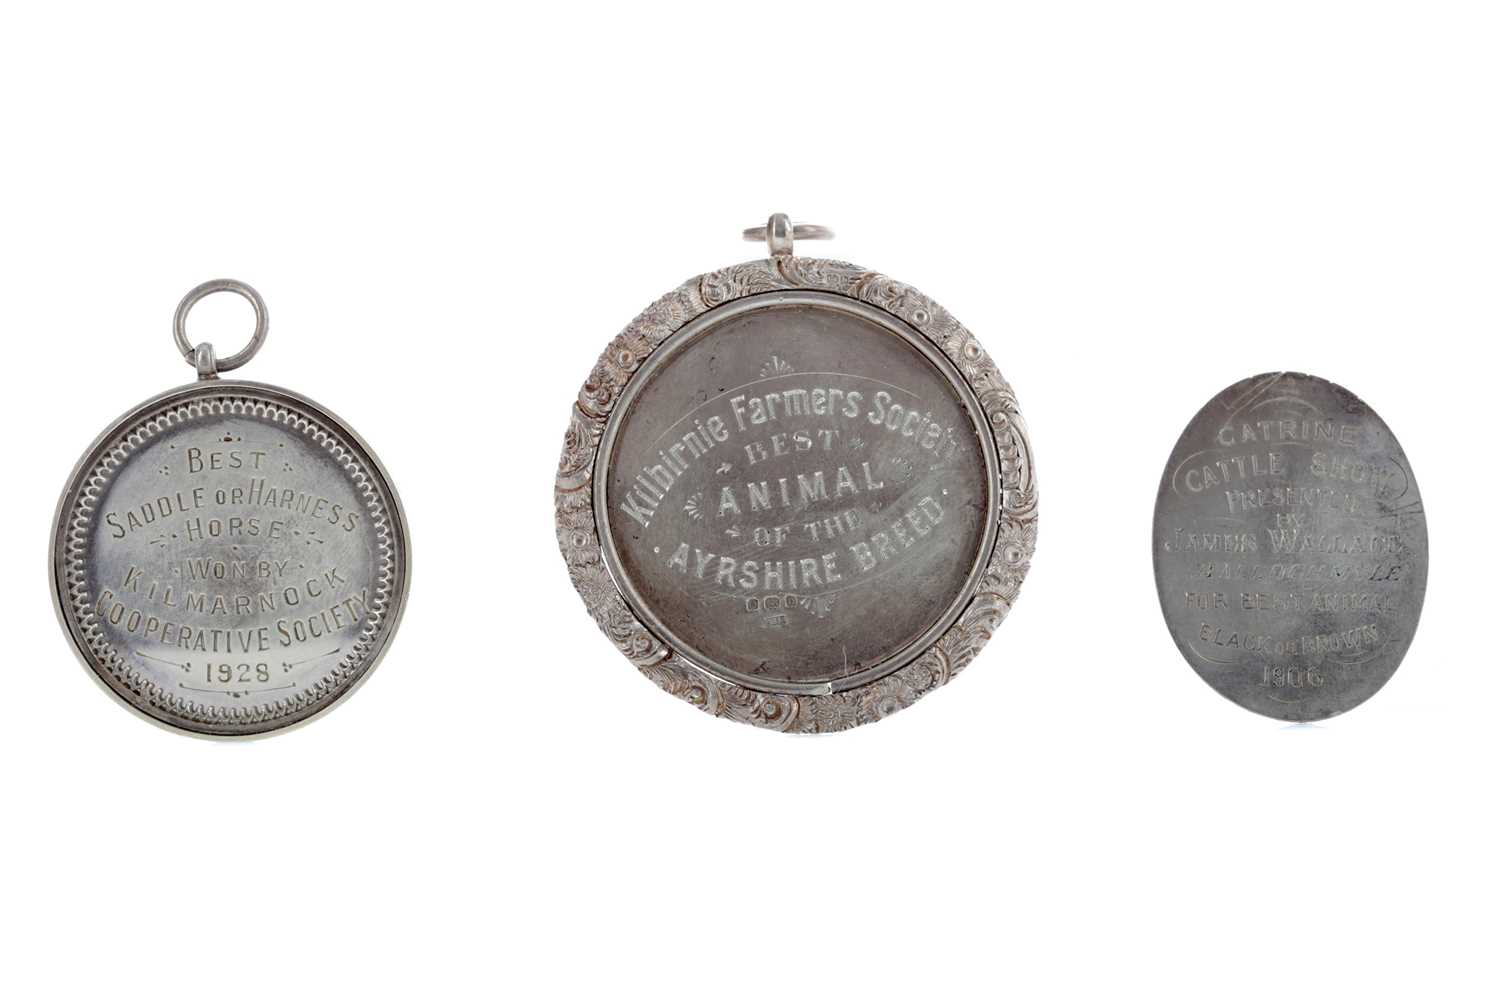 Lot 1125 - A LOT OF THREE EARLY 20TH CENTURY AYRSHIRE LIVESTOCK MEDALS